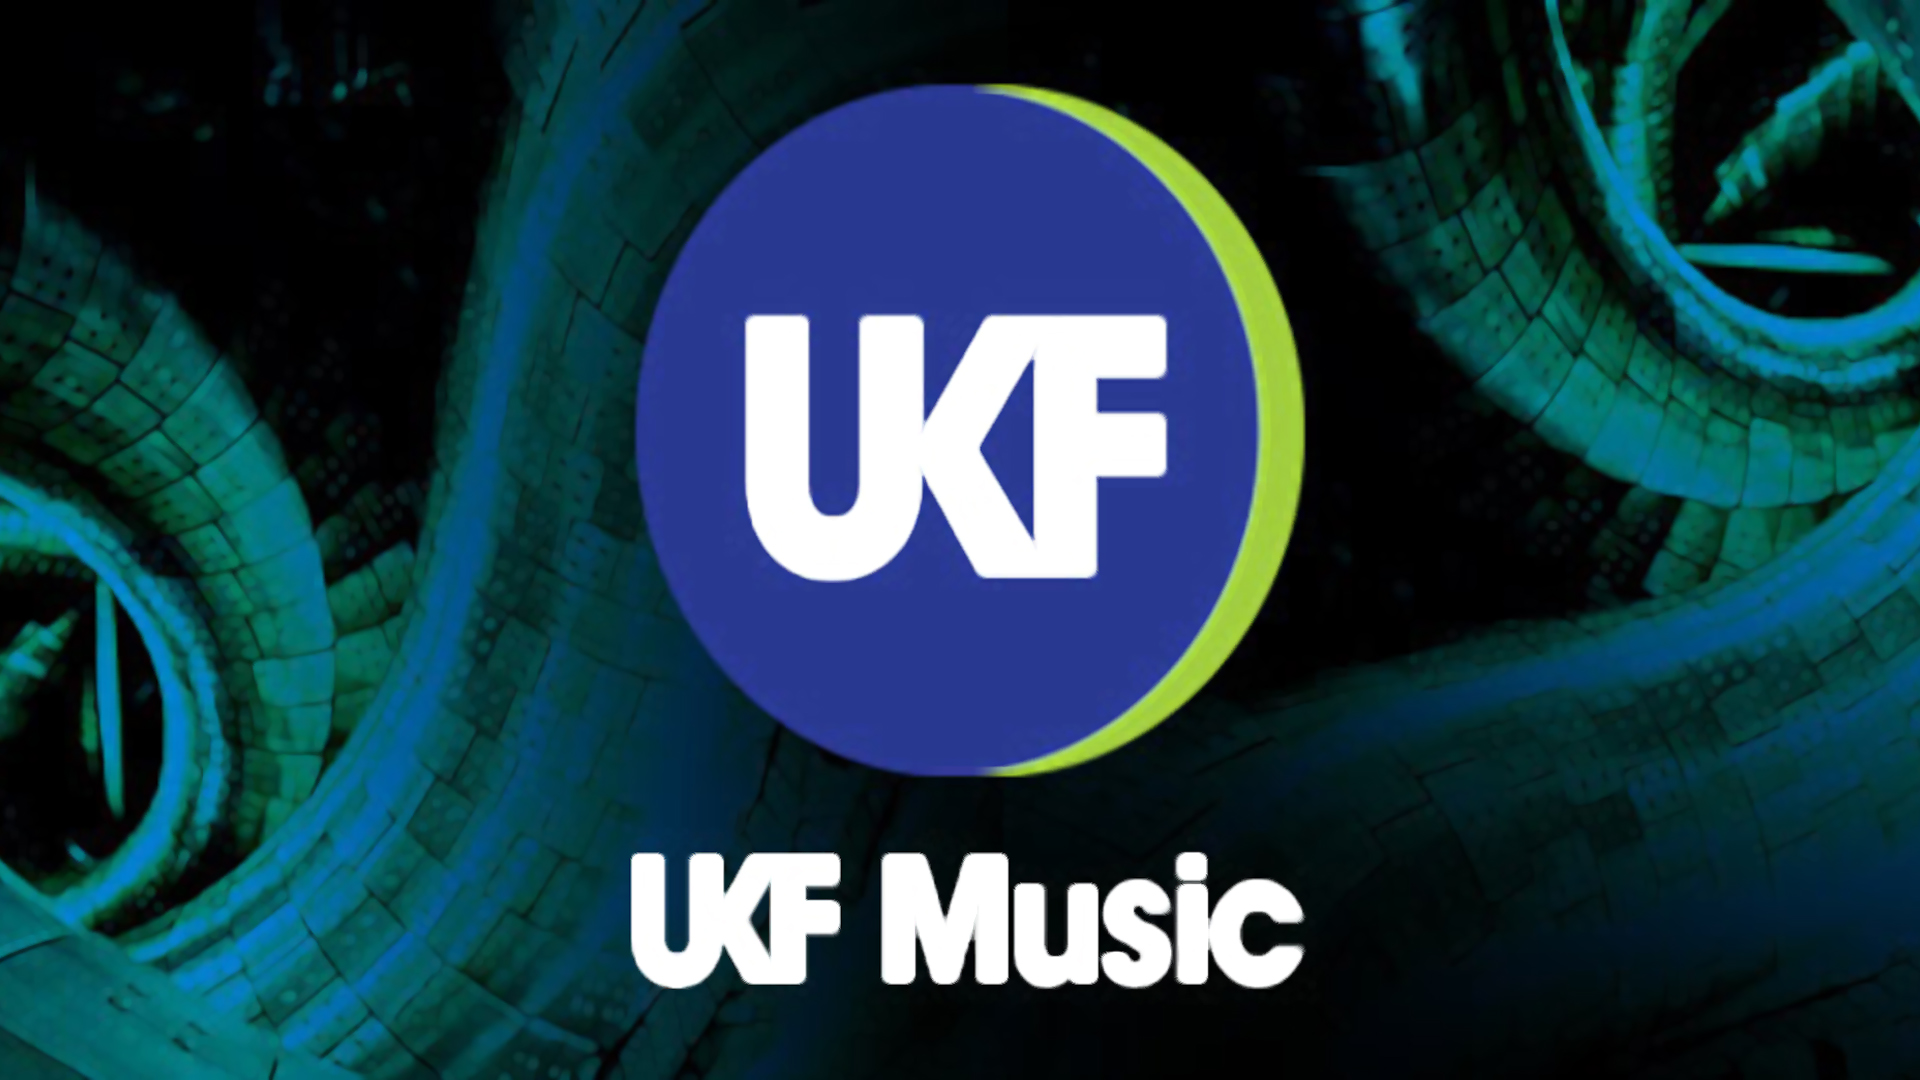 music, logo, drum and bass, dubstep, electronic music, ukf music